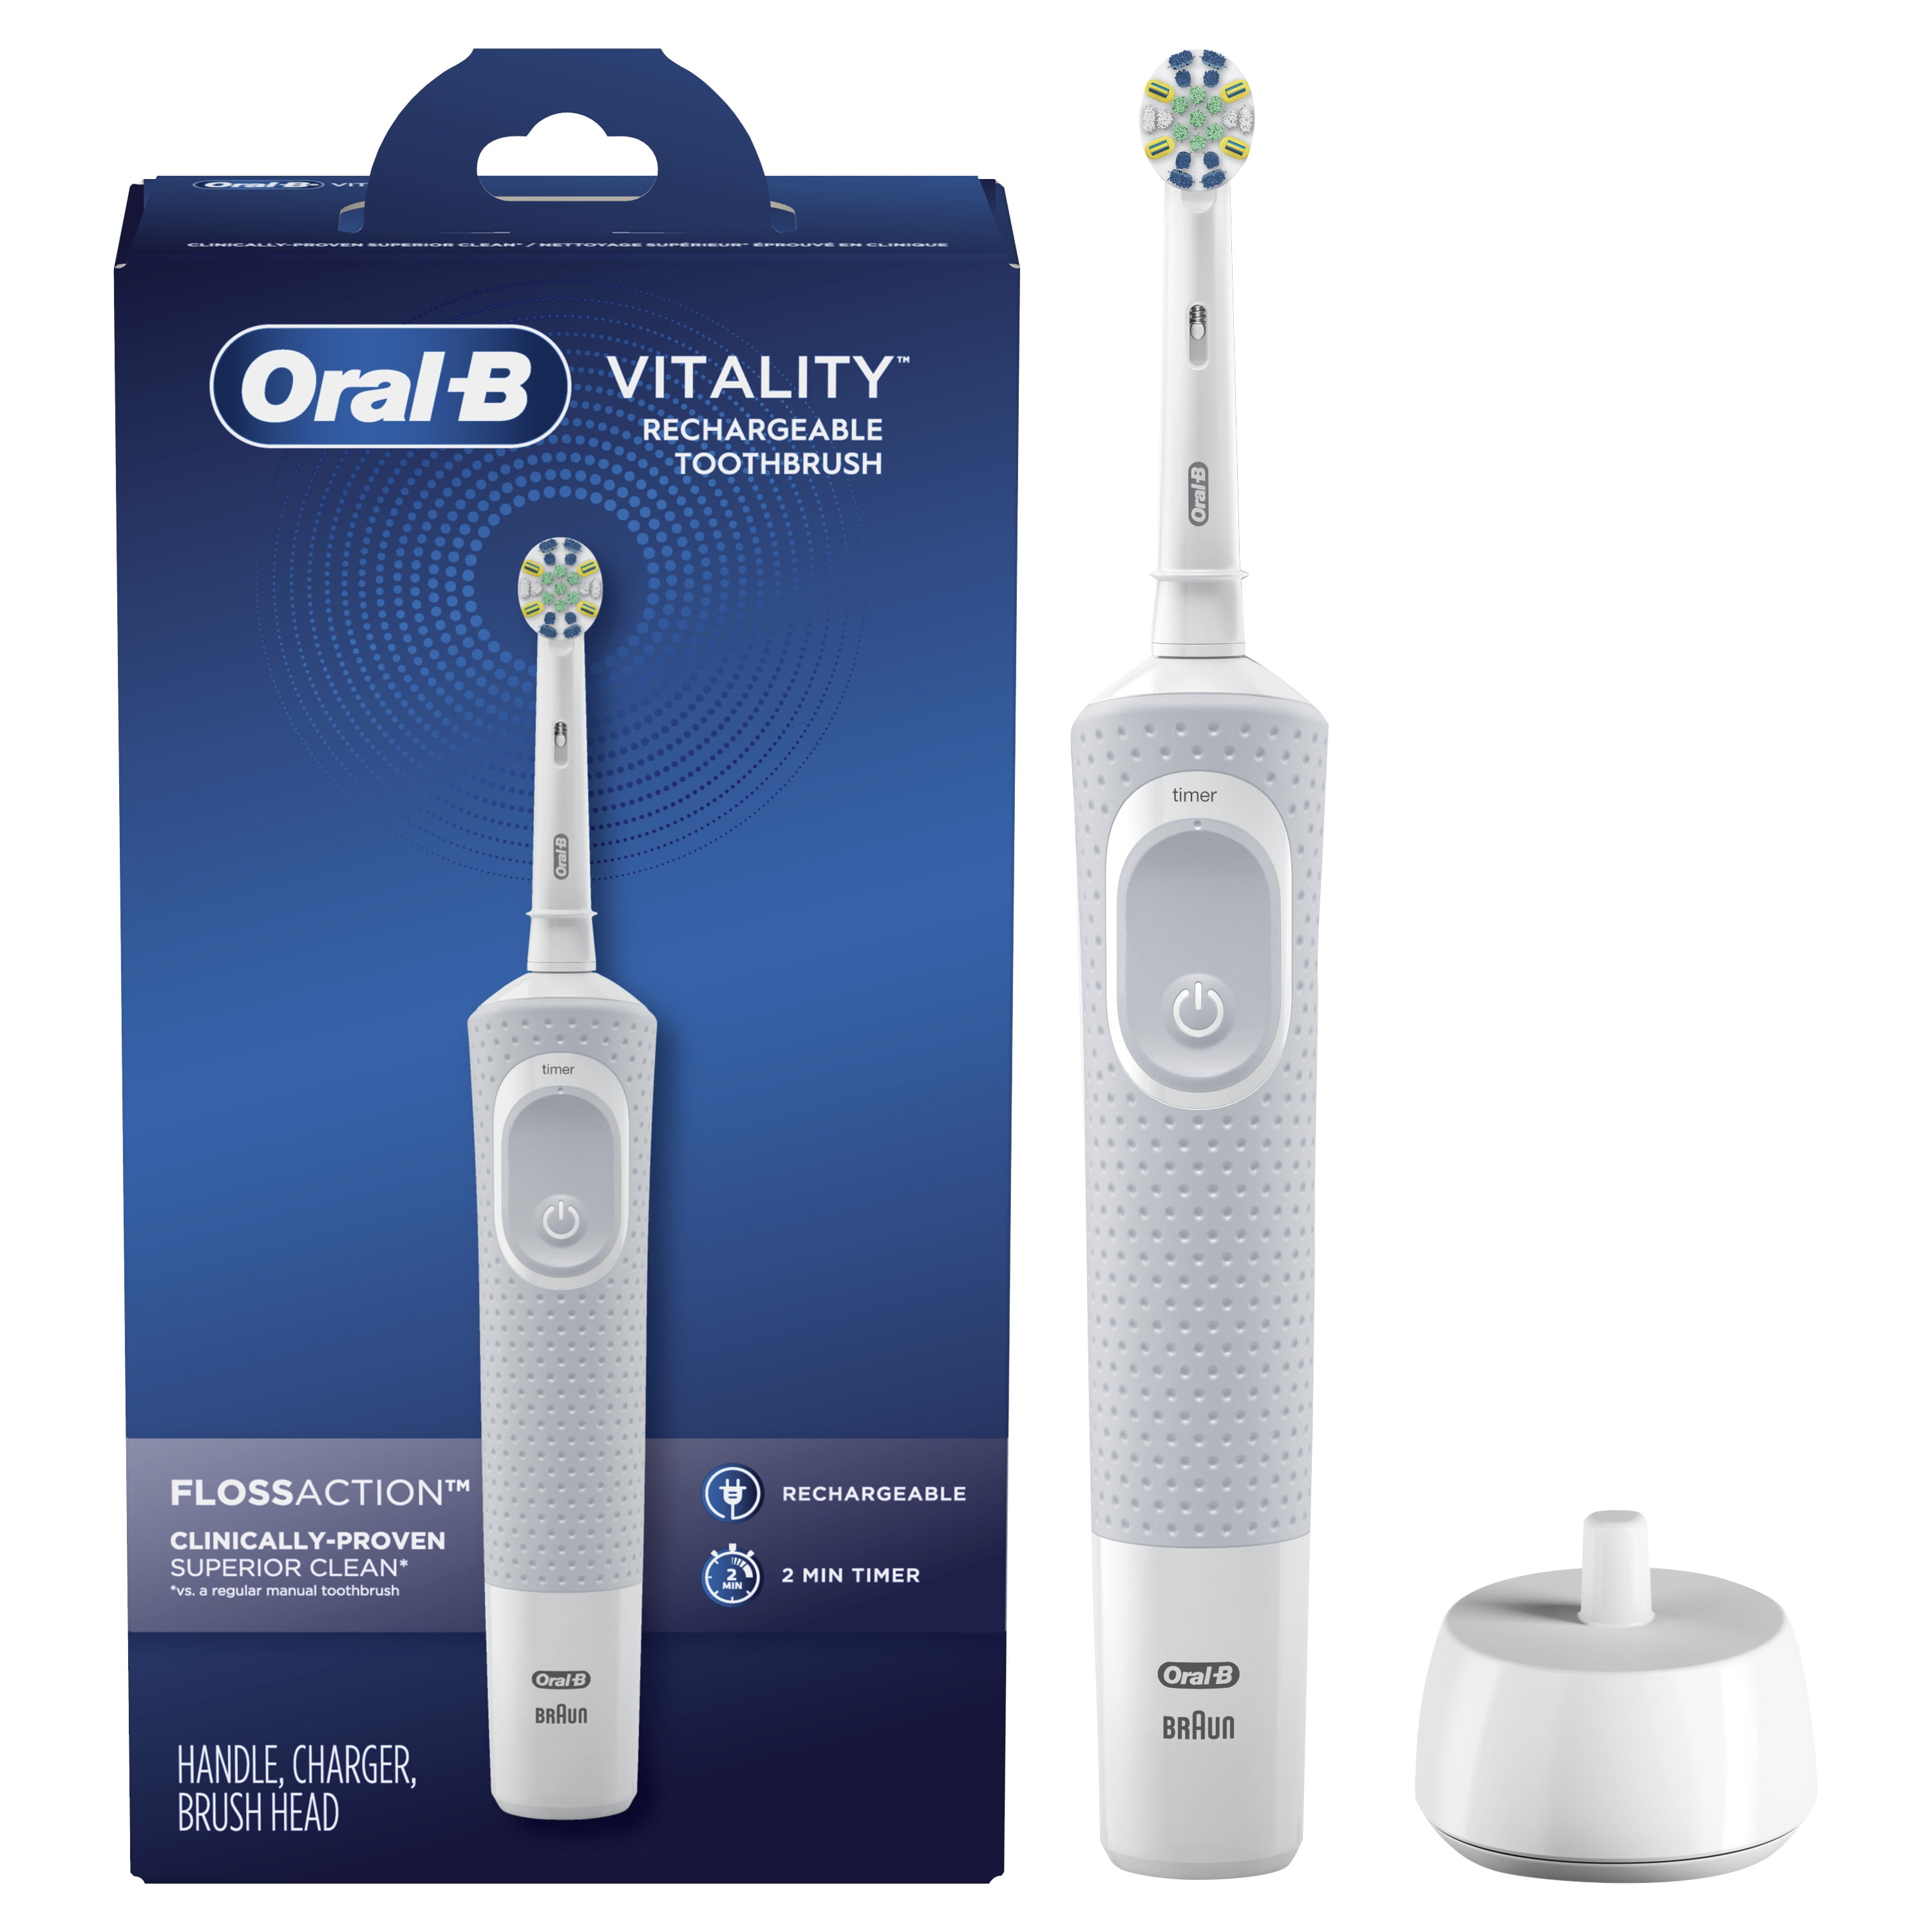 OralB Vitality FlossAction Electric Rechargeable Toothbrush, Powered